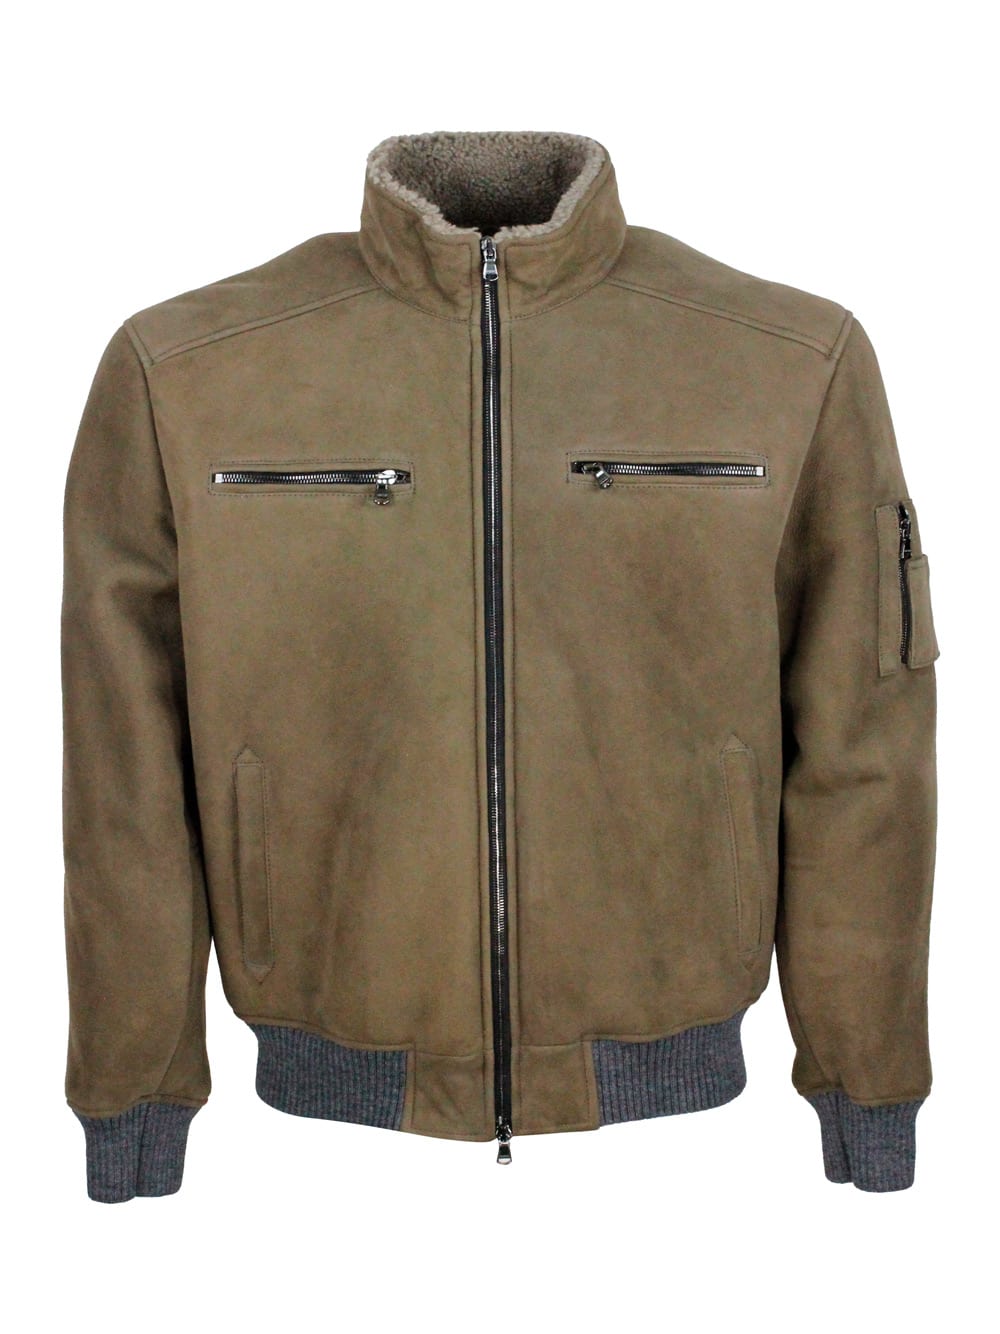 Barba Napoli Bomber Jacket In Fine And Soft Shearling Sheepskin With Stretch Knit Trims And Zip Closure. Front Po In Taupe